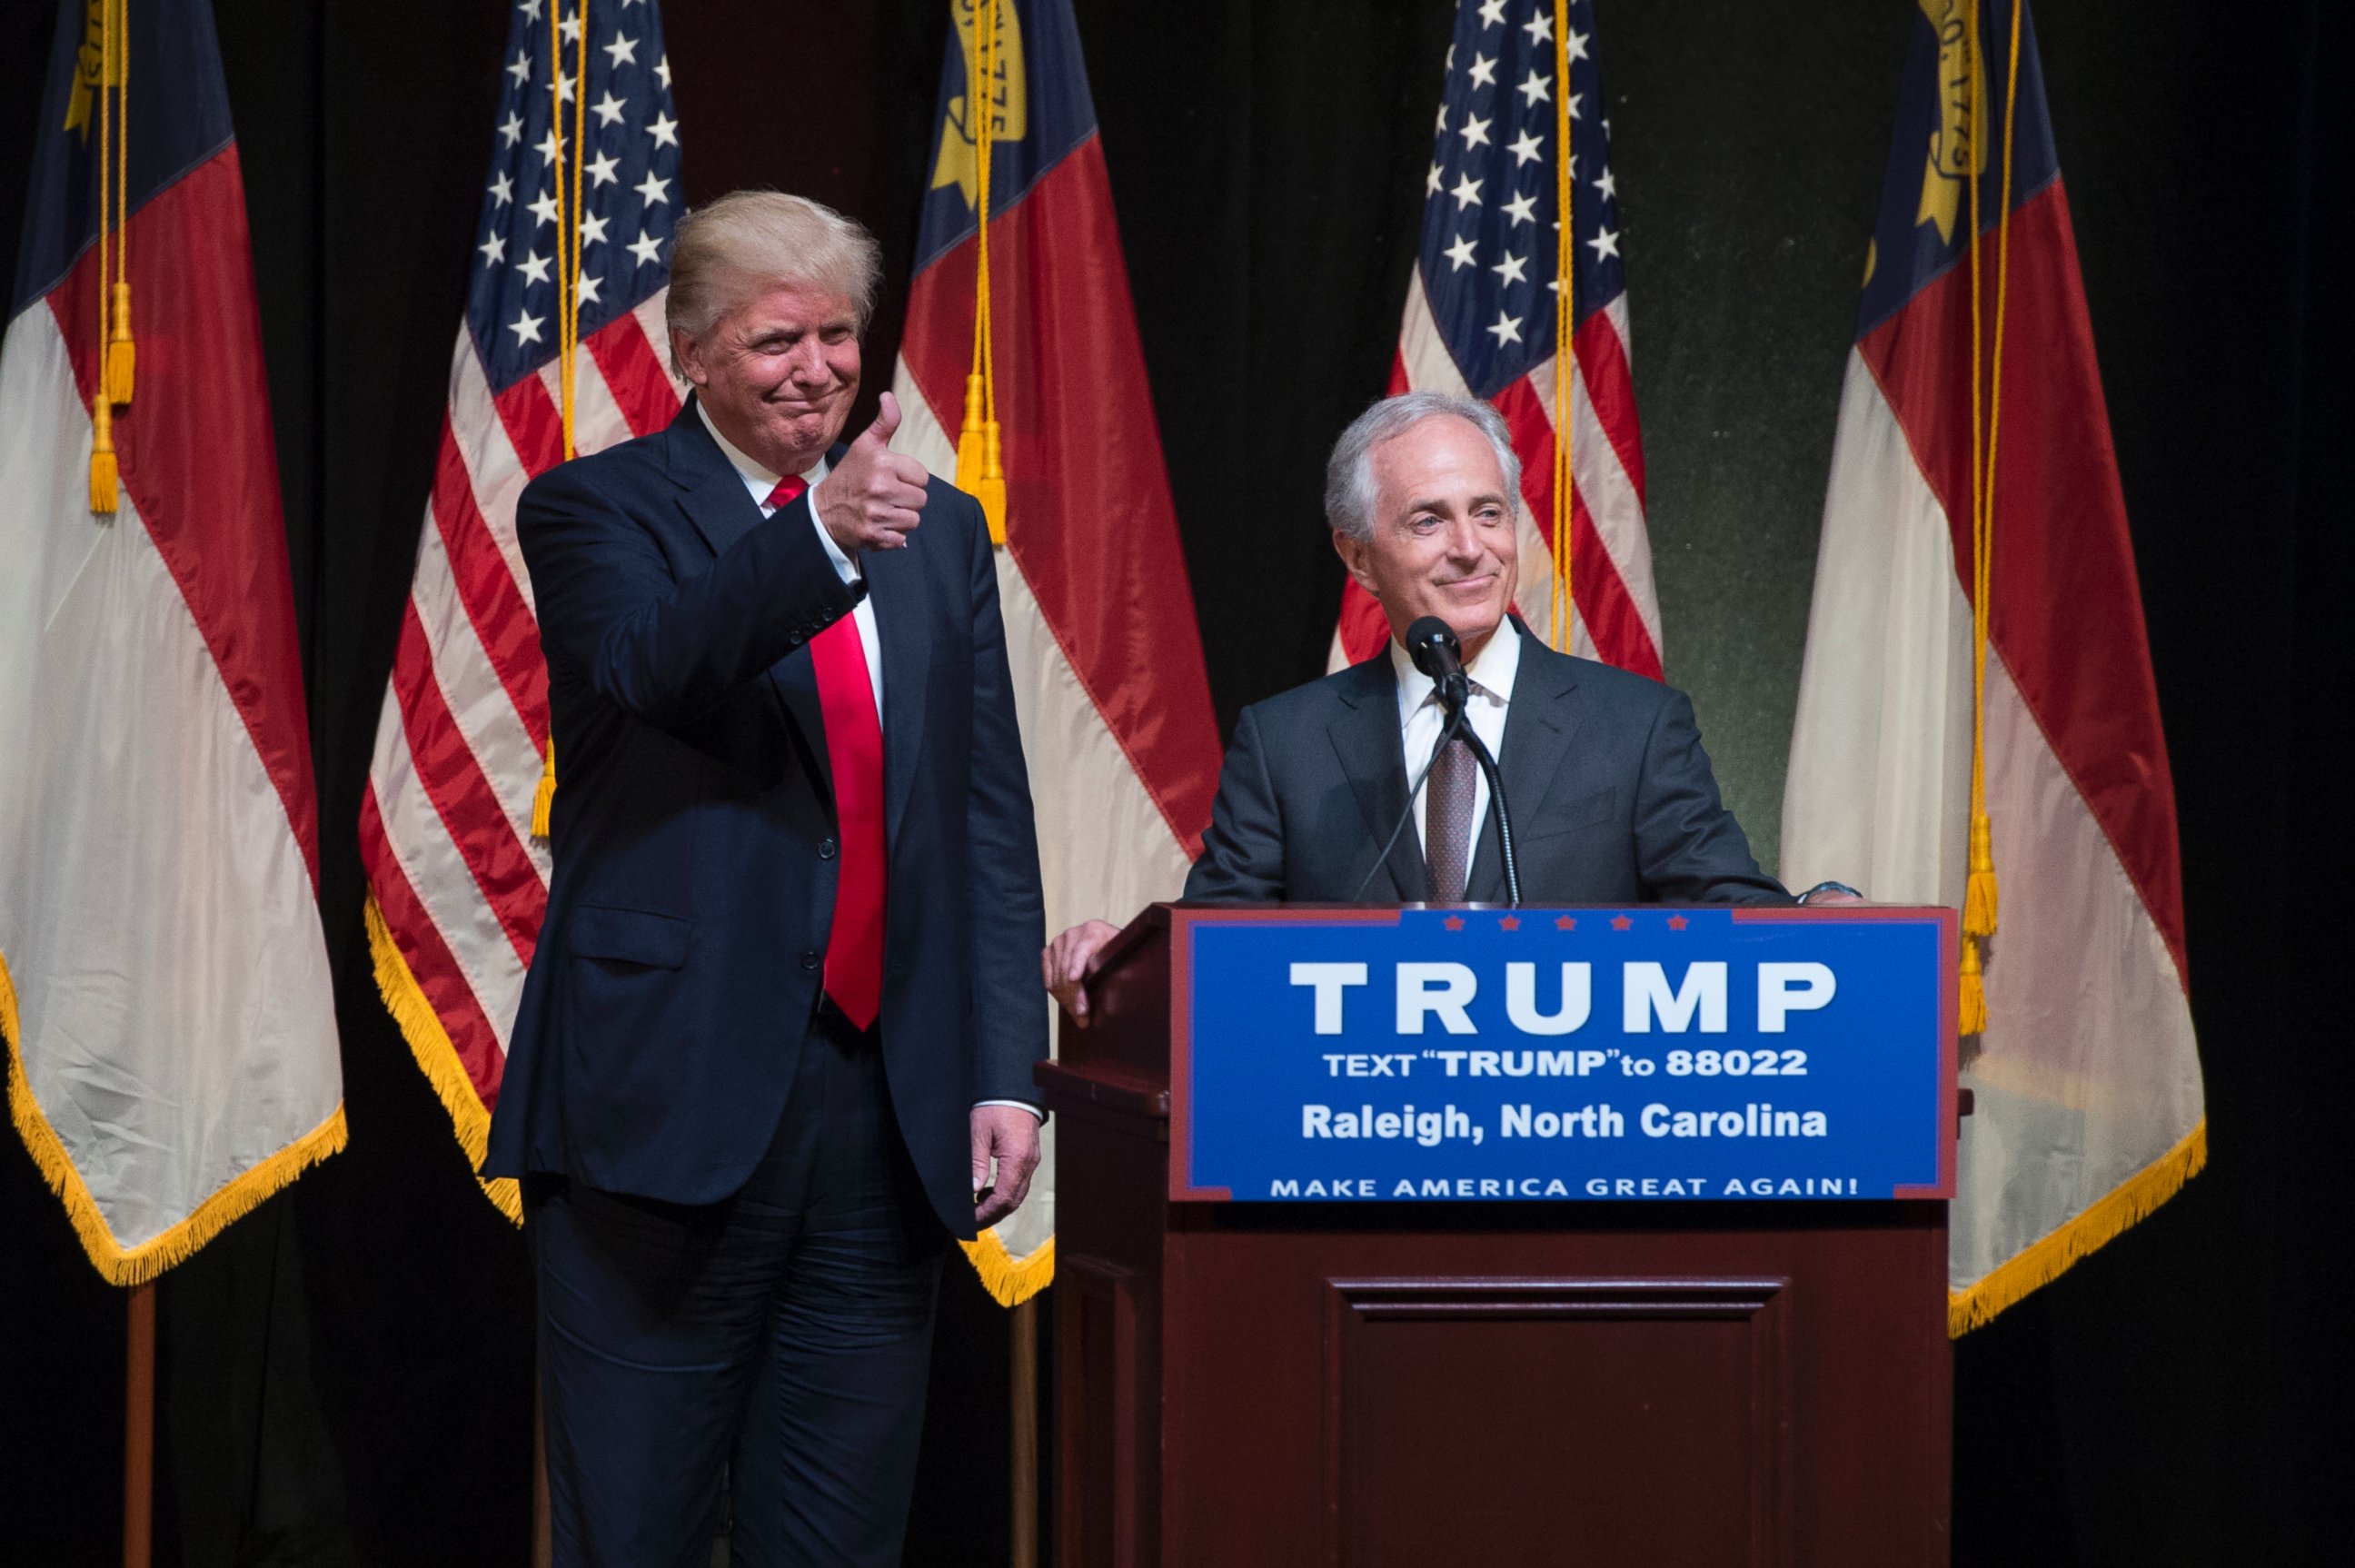 PHOTO: Donald Trump, left, and Sen. Bob Corker, R-Tenn., appear on stage during a rally at the Duke Energy Center in Raleigh, Nprth Carolina, July 5, 2016. 